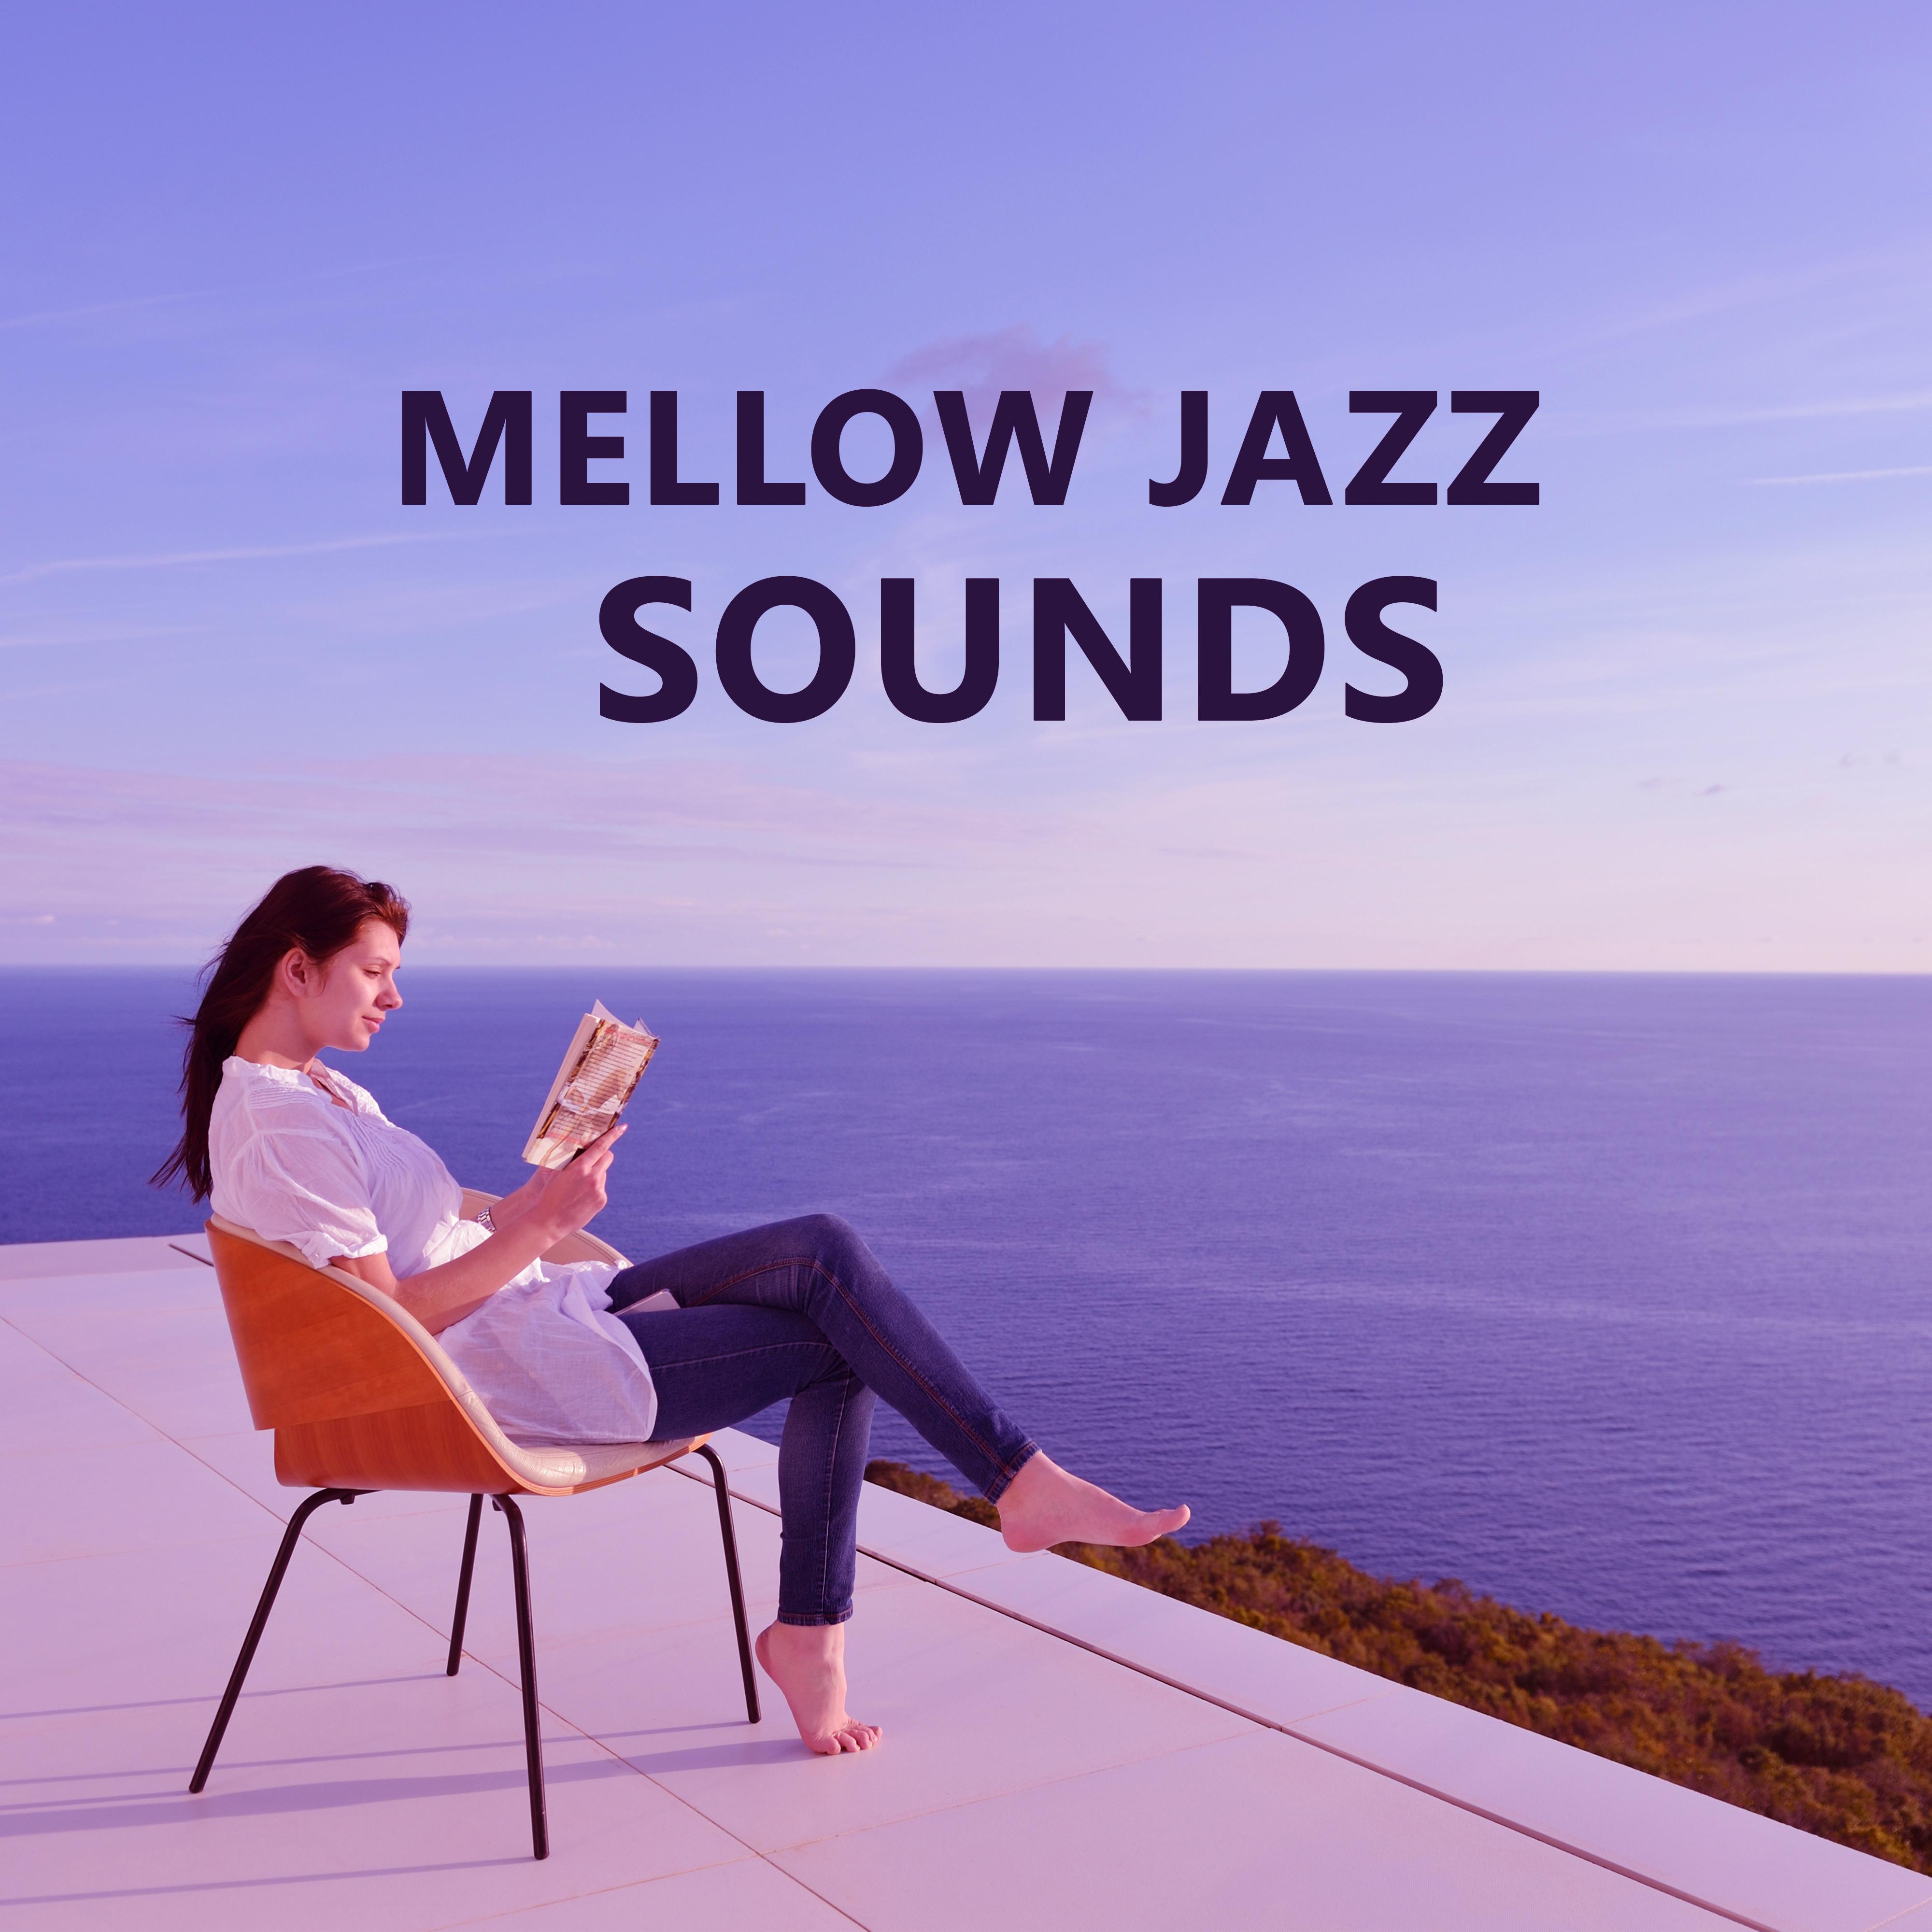 Mellow Jazz Sounds – Soft Sounds to Rest, Relaxing Night Jazz Songs, Peaceful Note